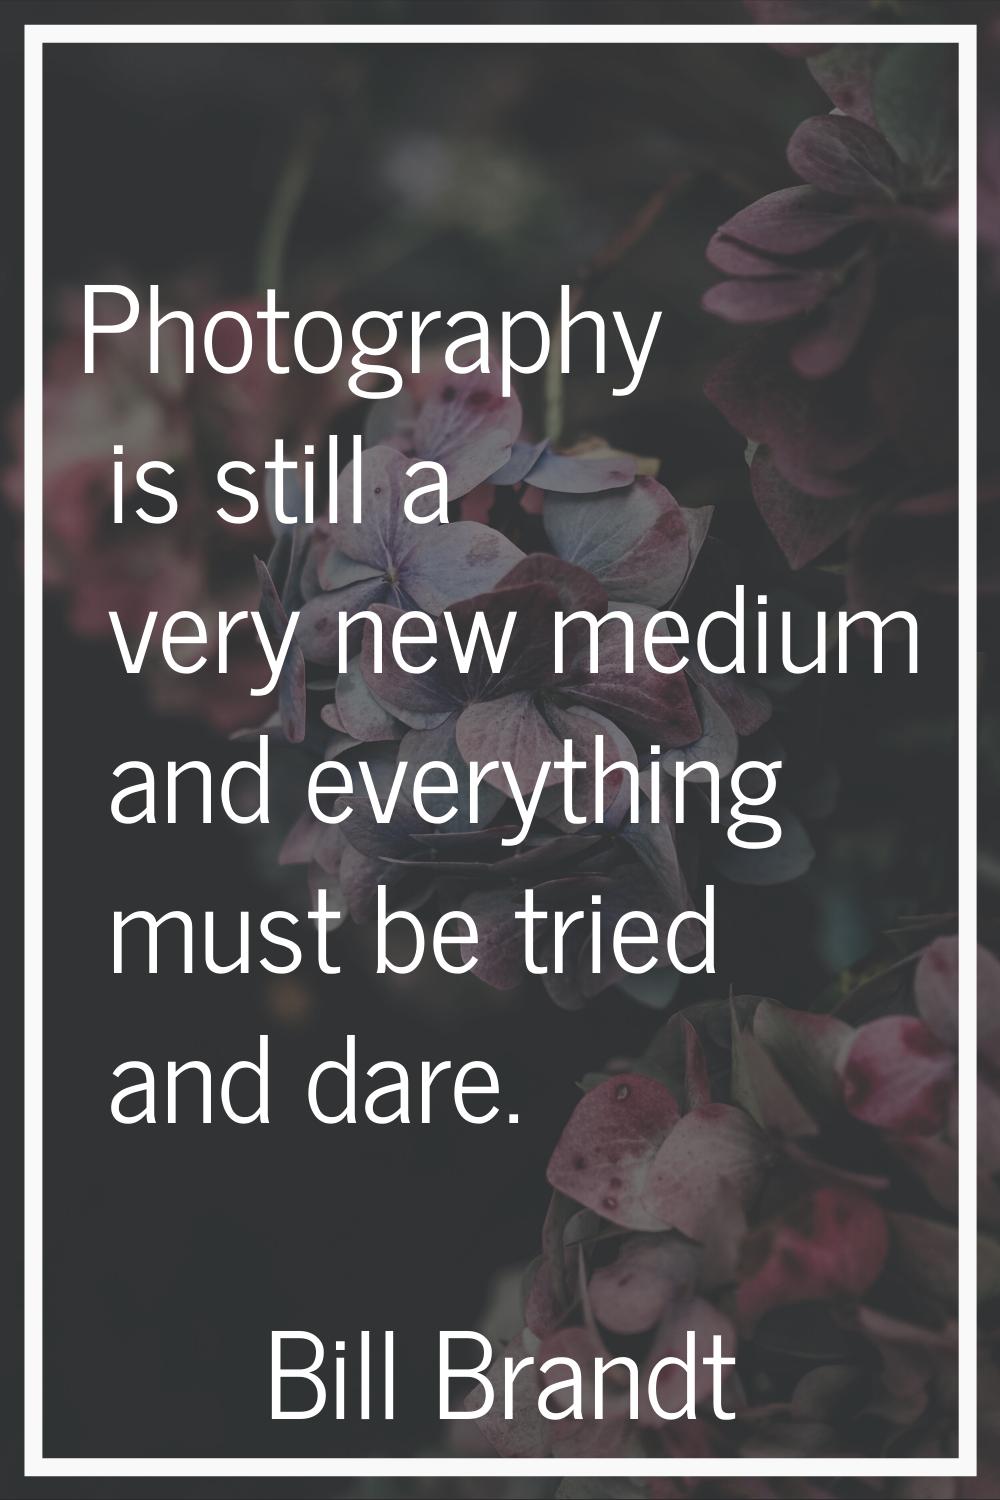 Photography is still a very new medium and everything must be tried and dare.